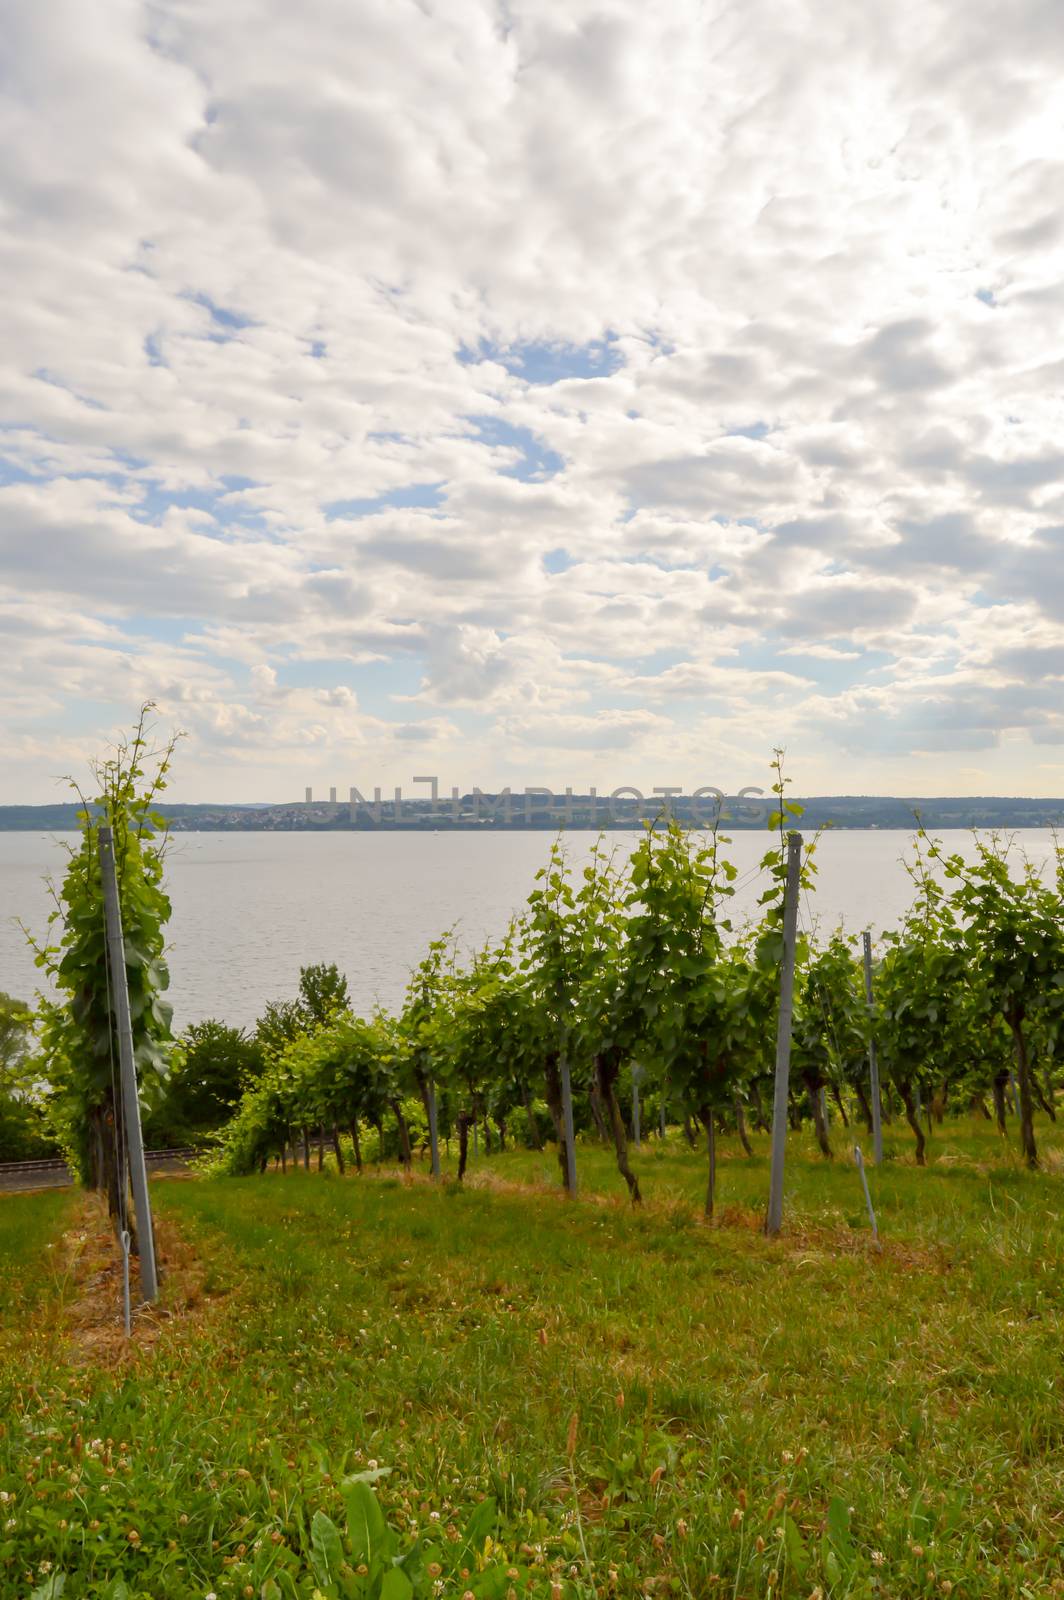 View of vine plants in Uhldingen on Lake Constance in Germany